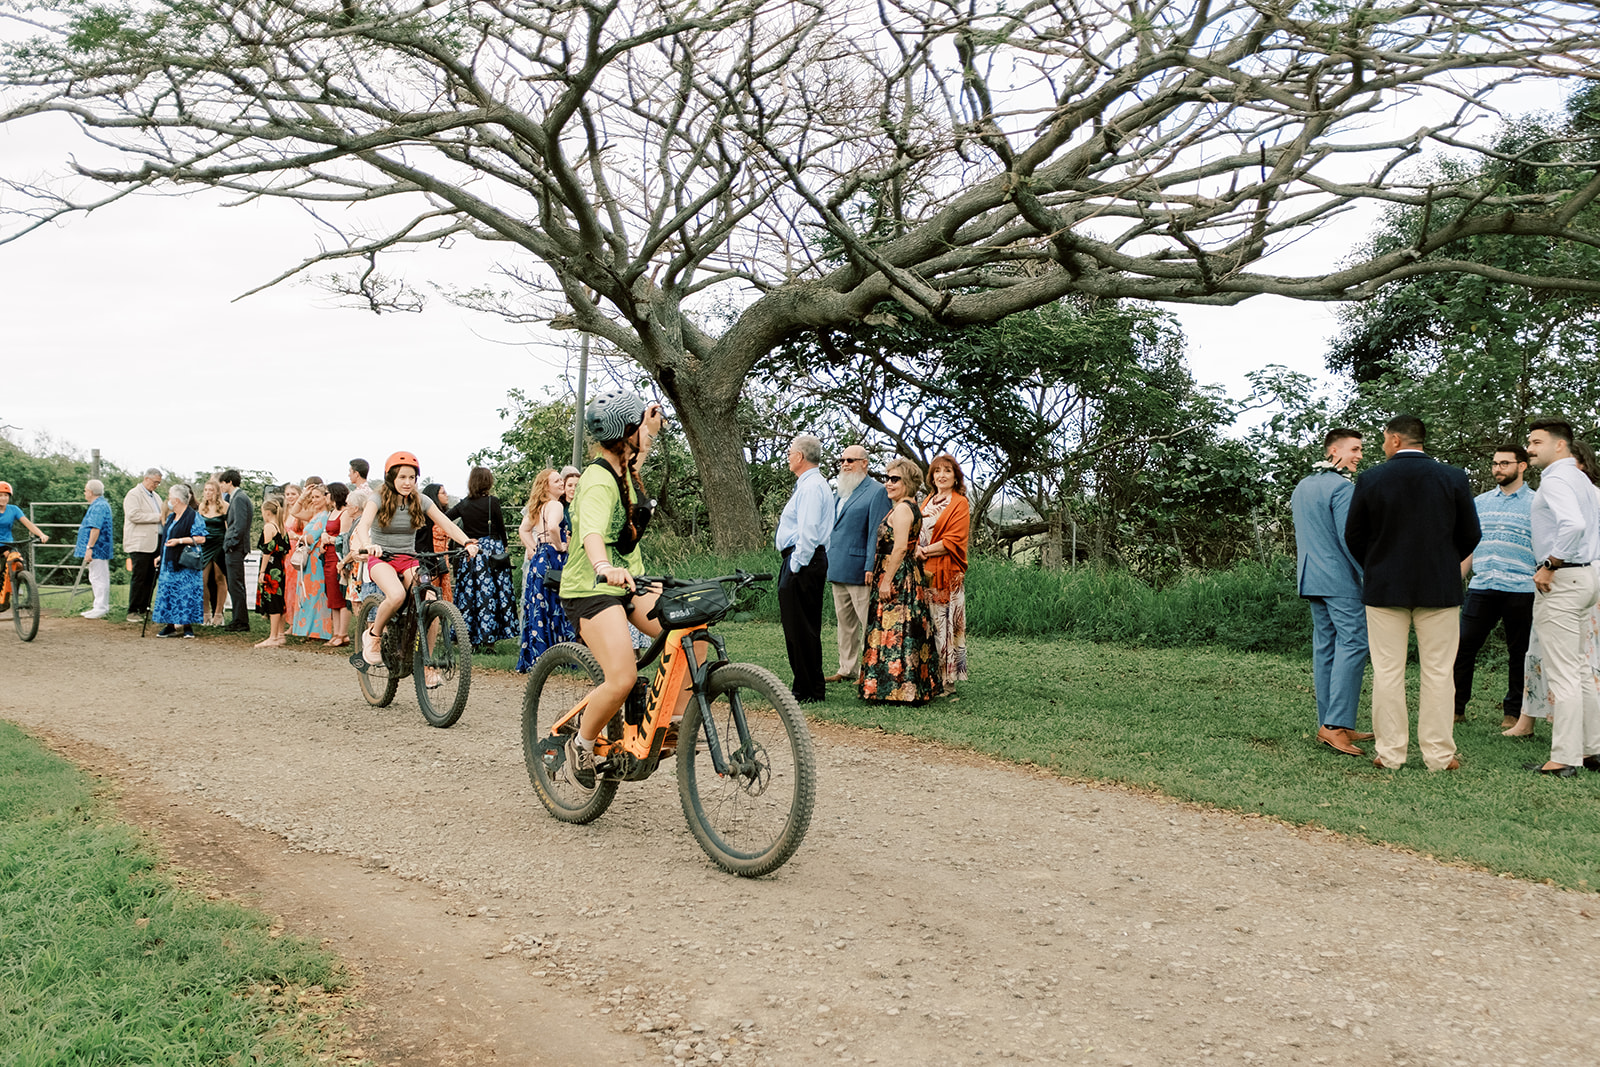 A group of people and a person riding a bike on a dirt road.